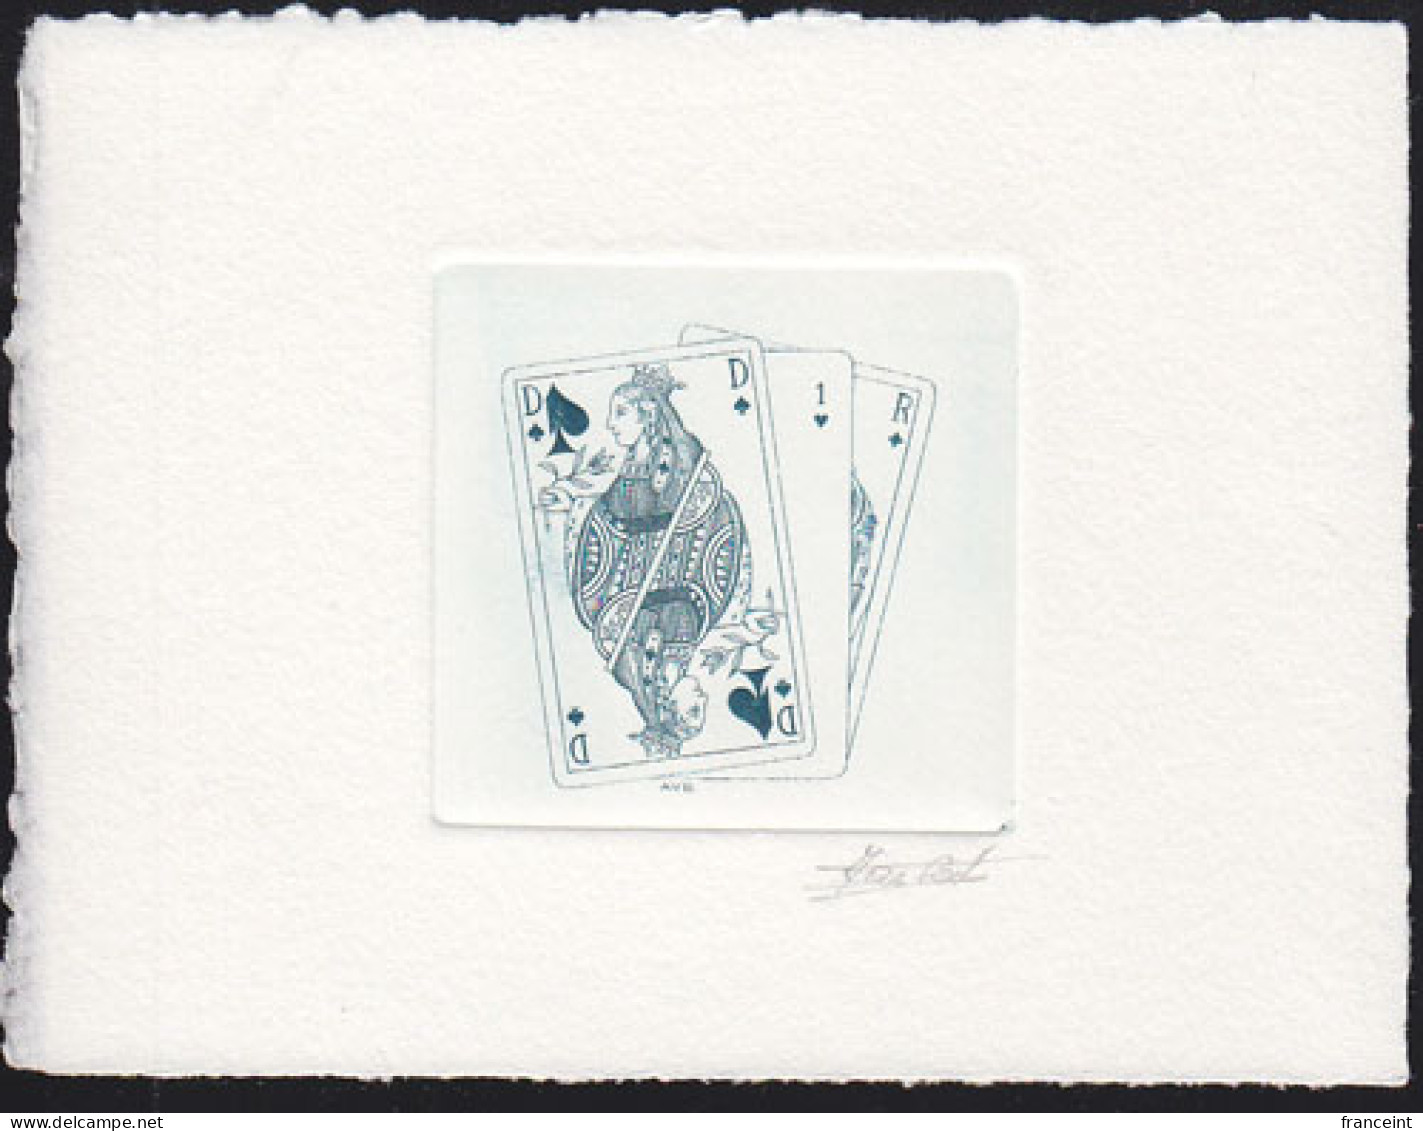 BELGIUM(1995) Playing Cards. Die Proof In Blue Signed By The Engraver, Representing The FDC Cachet. Scott No 1579 - Proeven & Herdruk